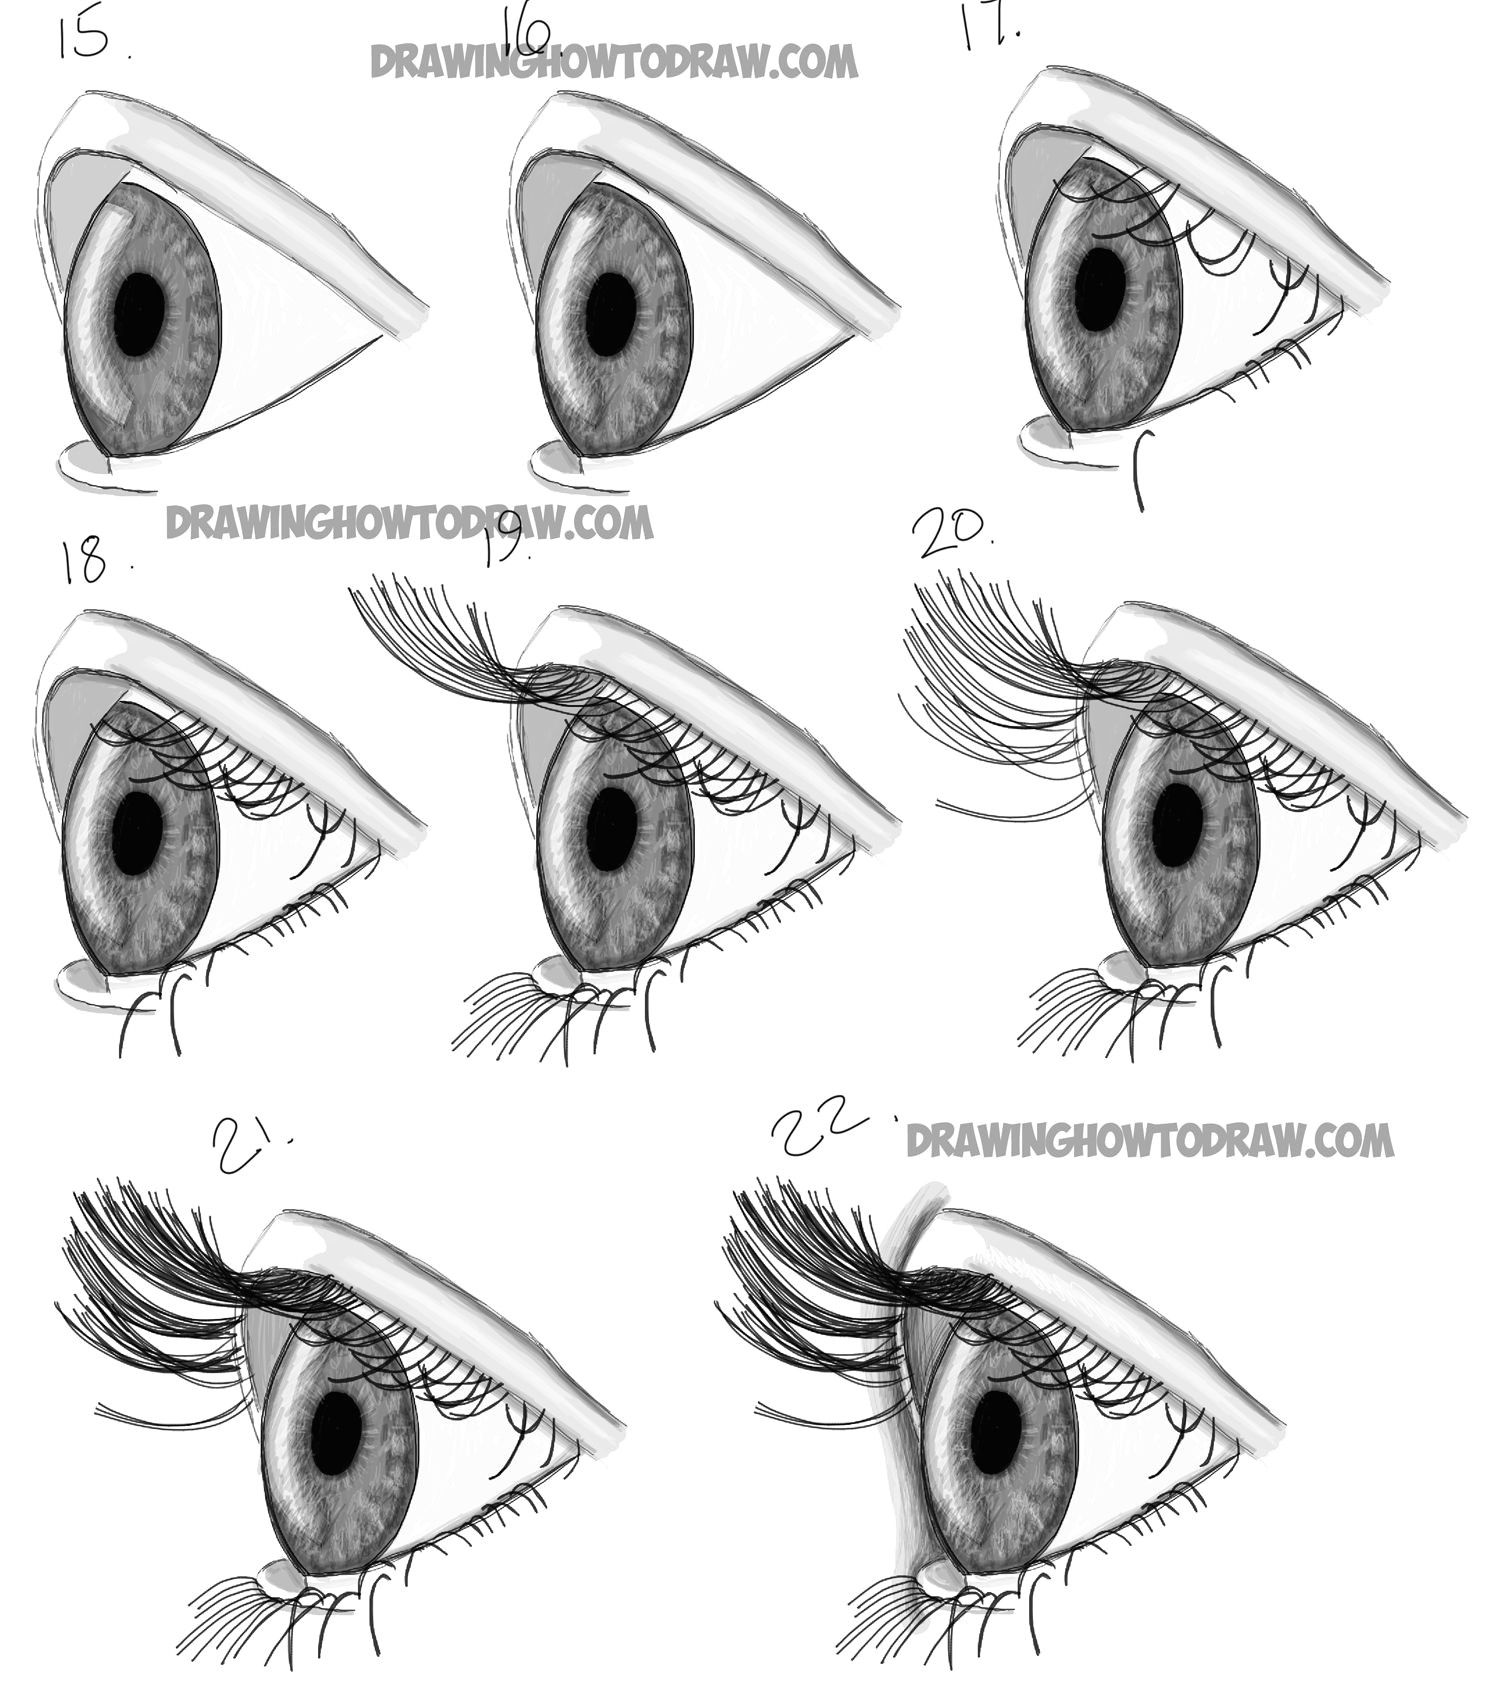 Drawing Eyes Tips How to Draw Realistic Eyes From the Side Profile View Step by Step